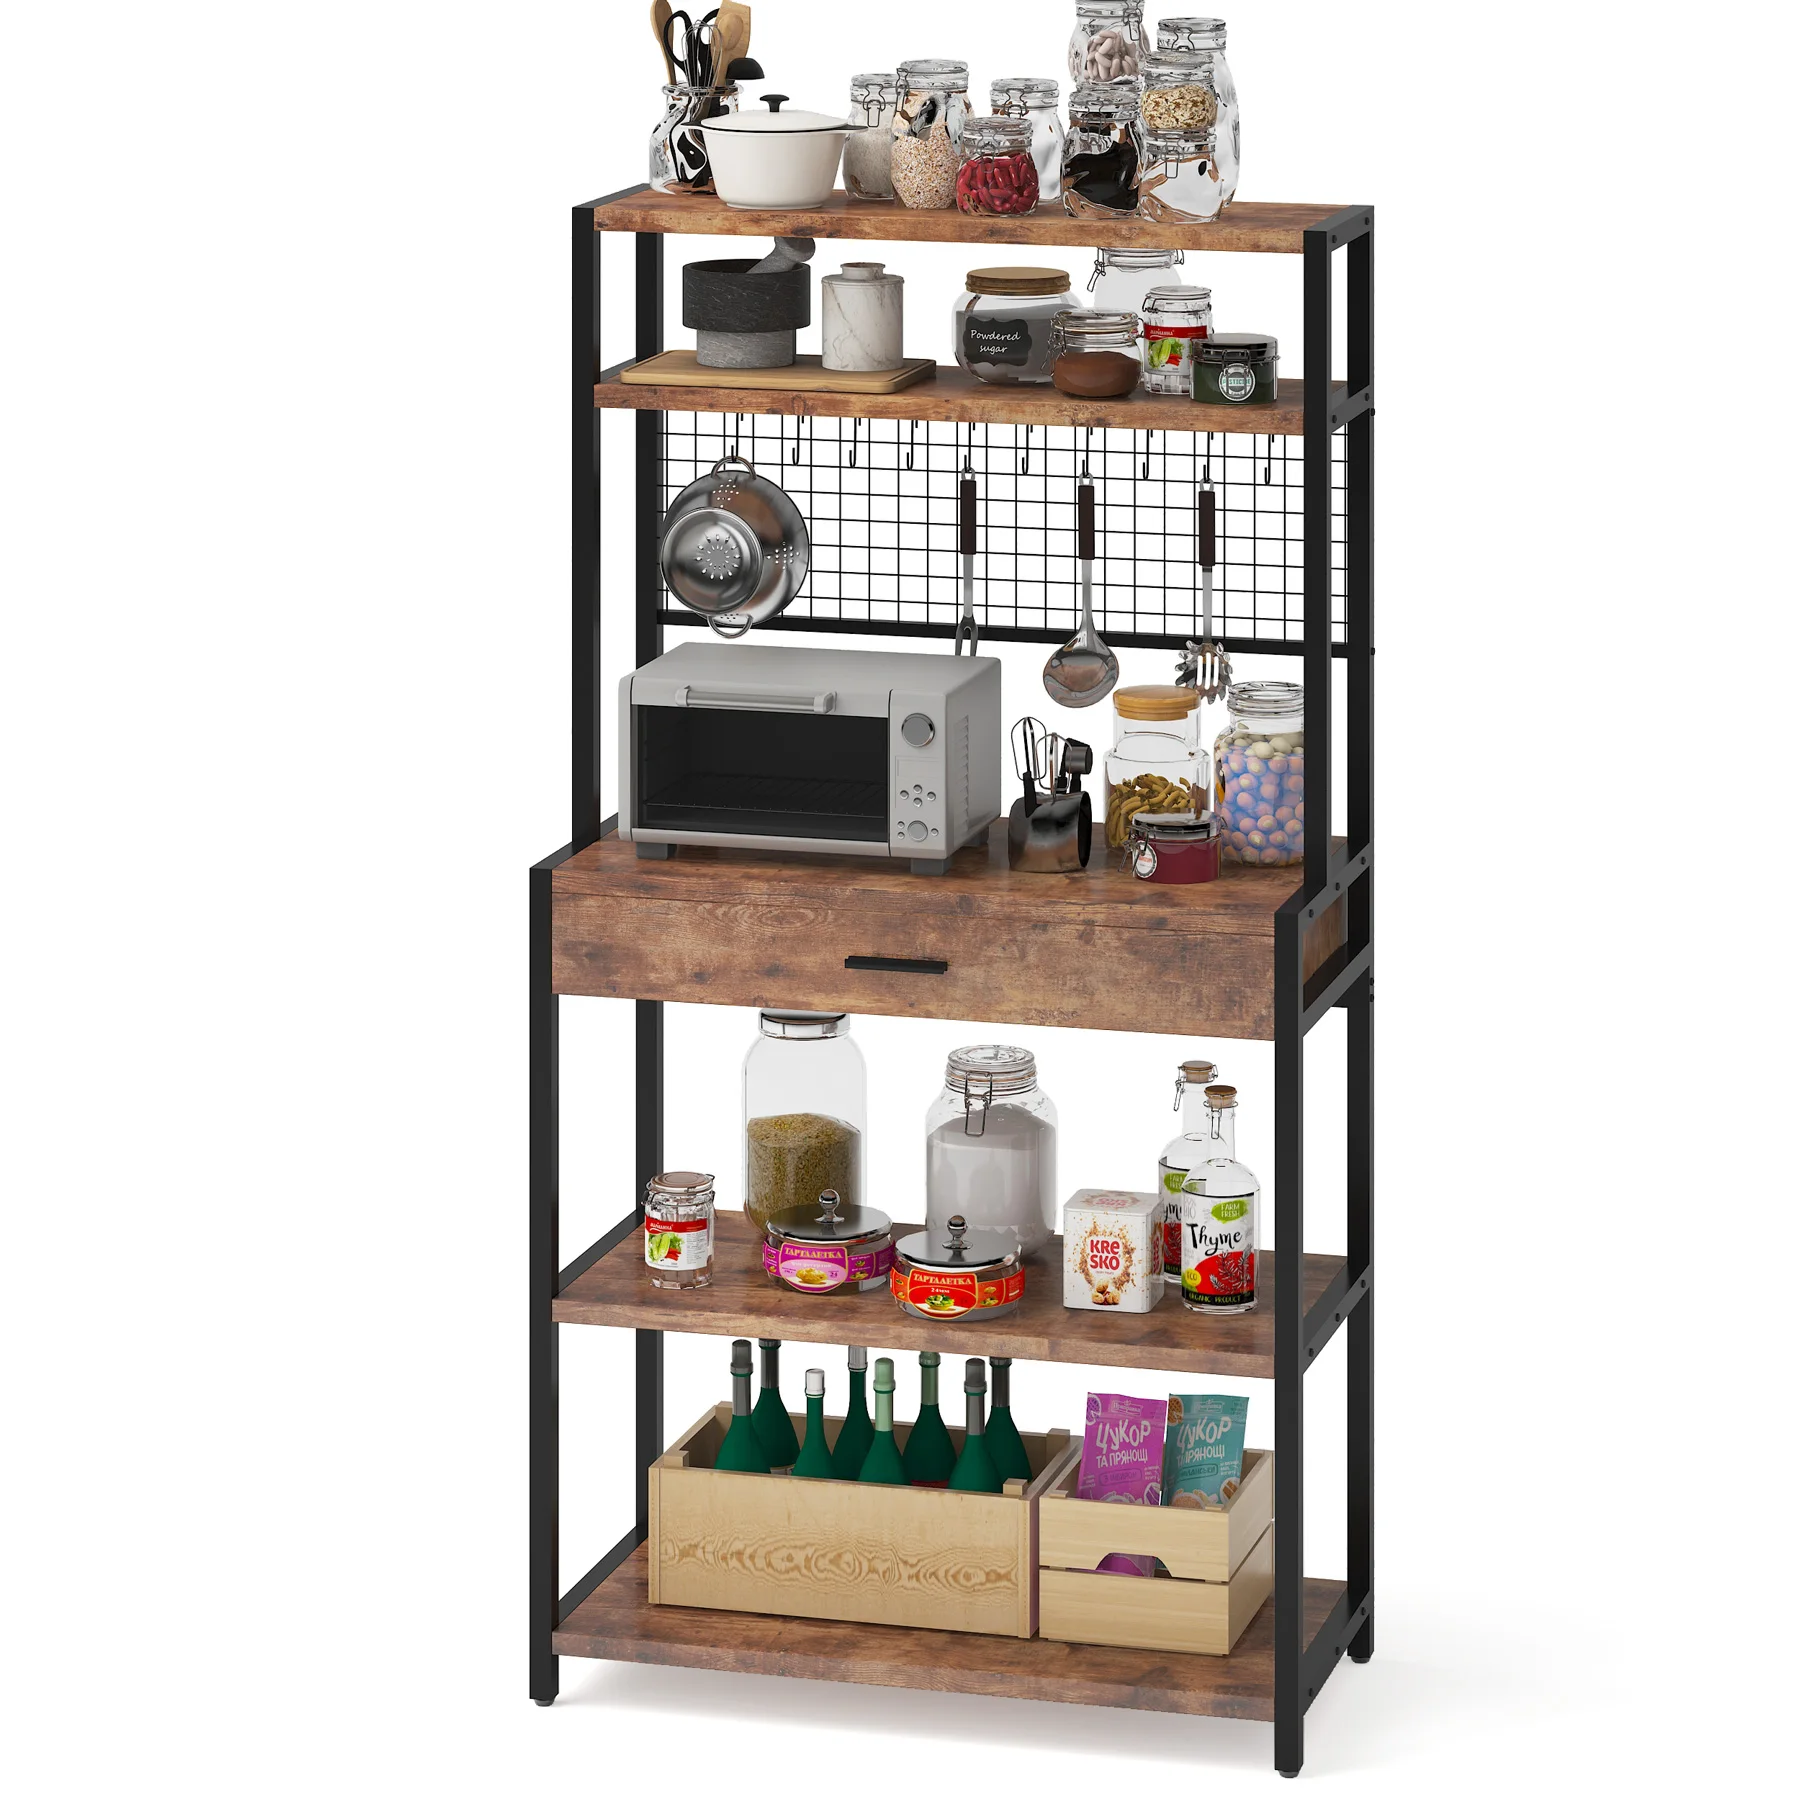 Dropshipping Microwave Stand Bakers Rack Kitchen Storage Stand Shelf Rack 5-tier Kitchen Bakers Rack